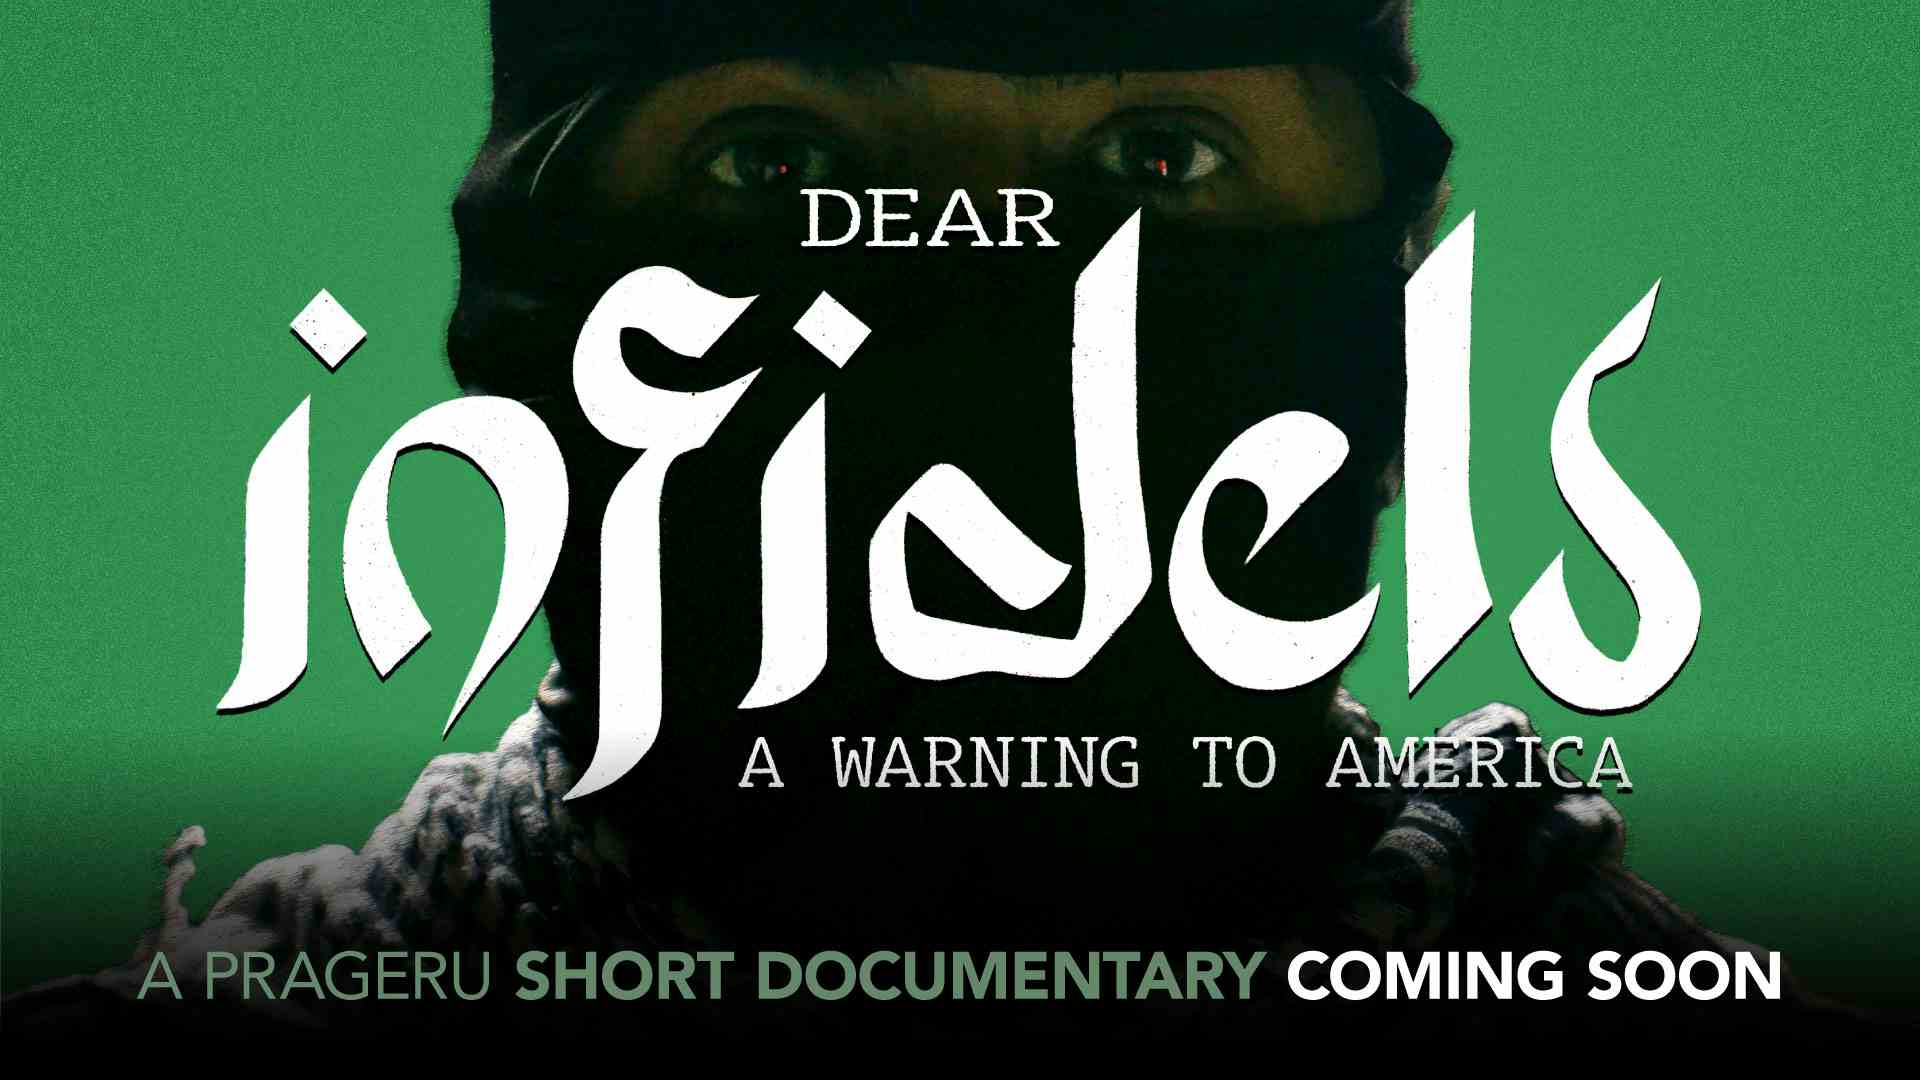 Trailer — Dear Infidels: A Warning to America